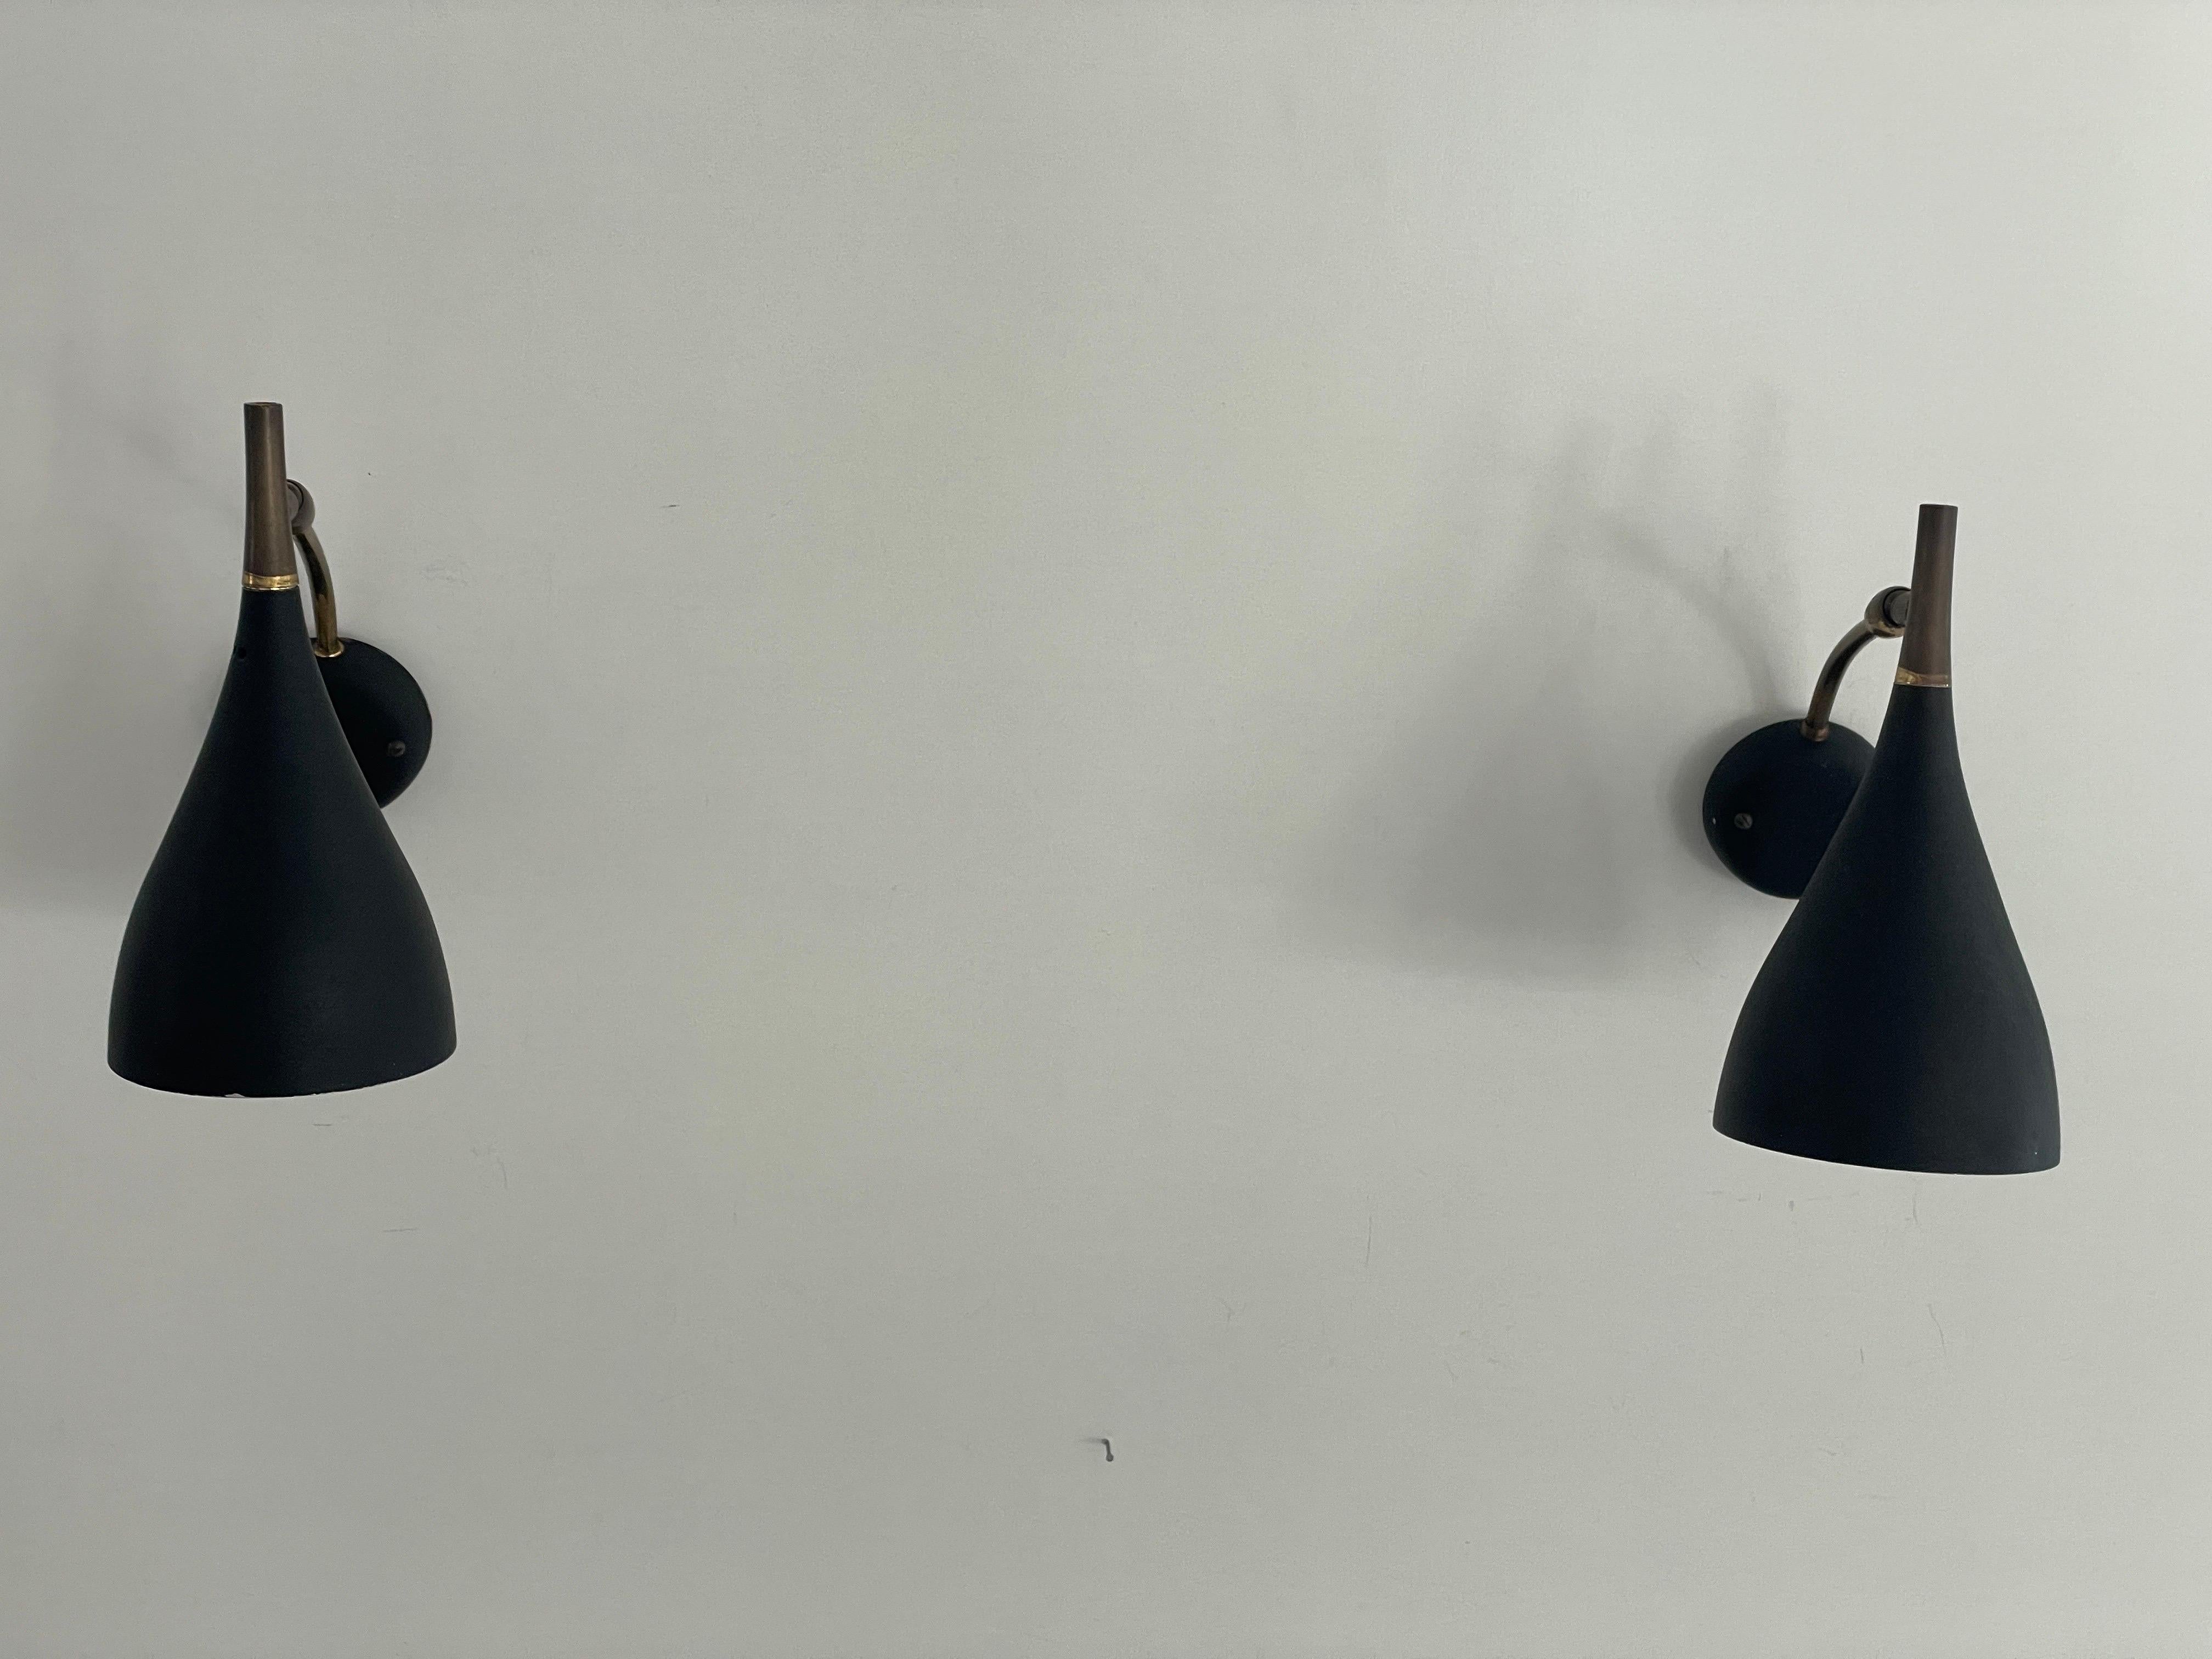 Mid-century Modern Pair of Sconces by Cosack Leuchten, 1950s, Germany

Very elegant and Minimalist  Black wall lamps
Lamp is in very good condition.

These lamps works with E14 standard light bulbs. 
Wired and suitable to use in all countries.